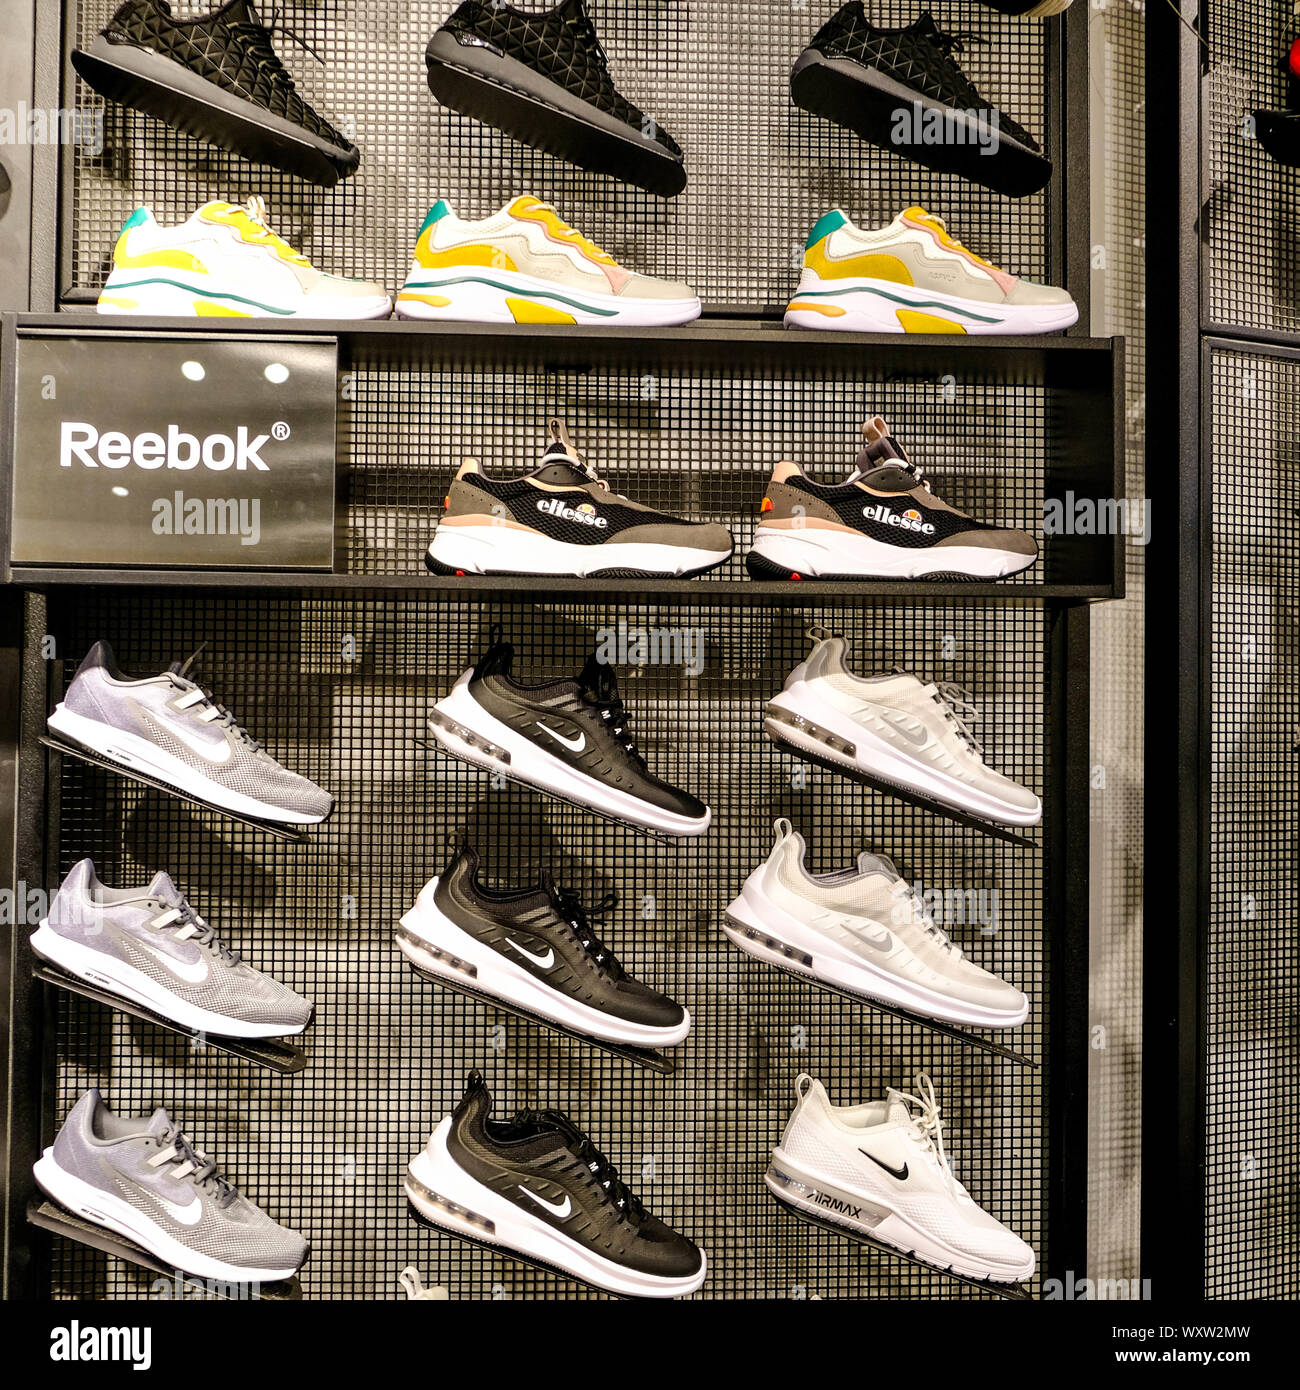 Puma vs Reebok Running Shoes Which Brand Should You Buy